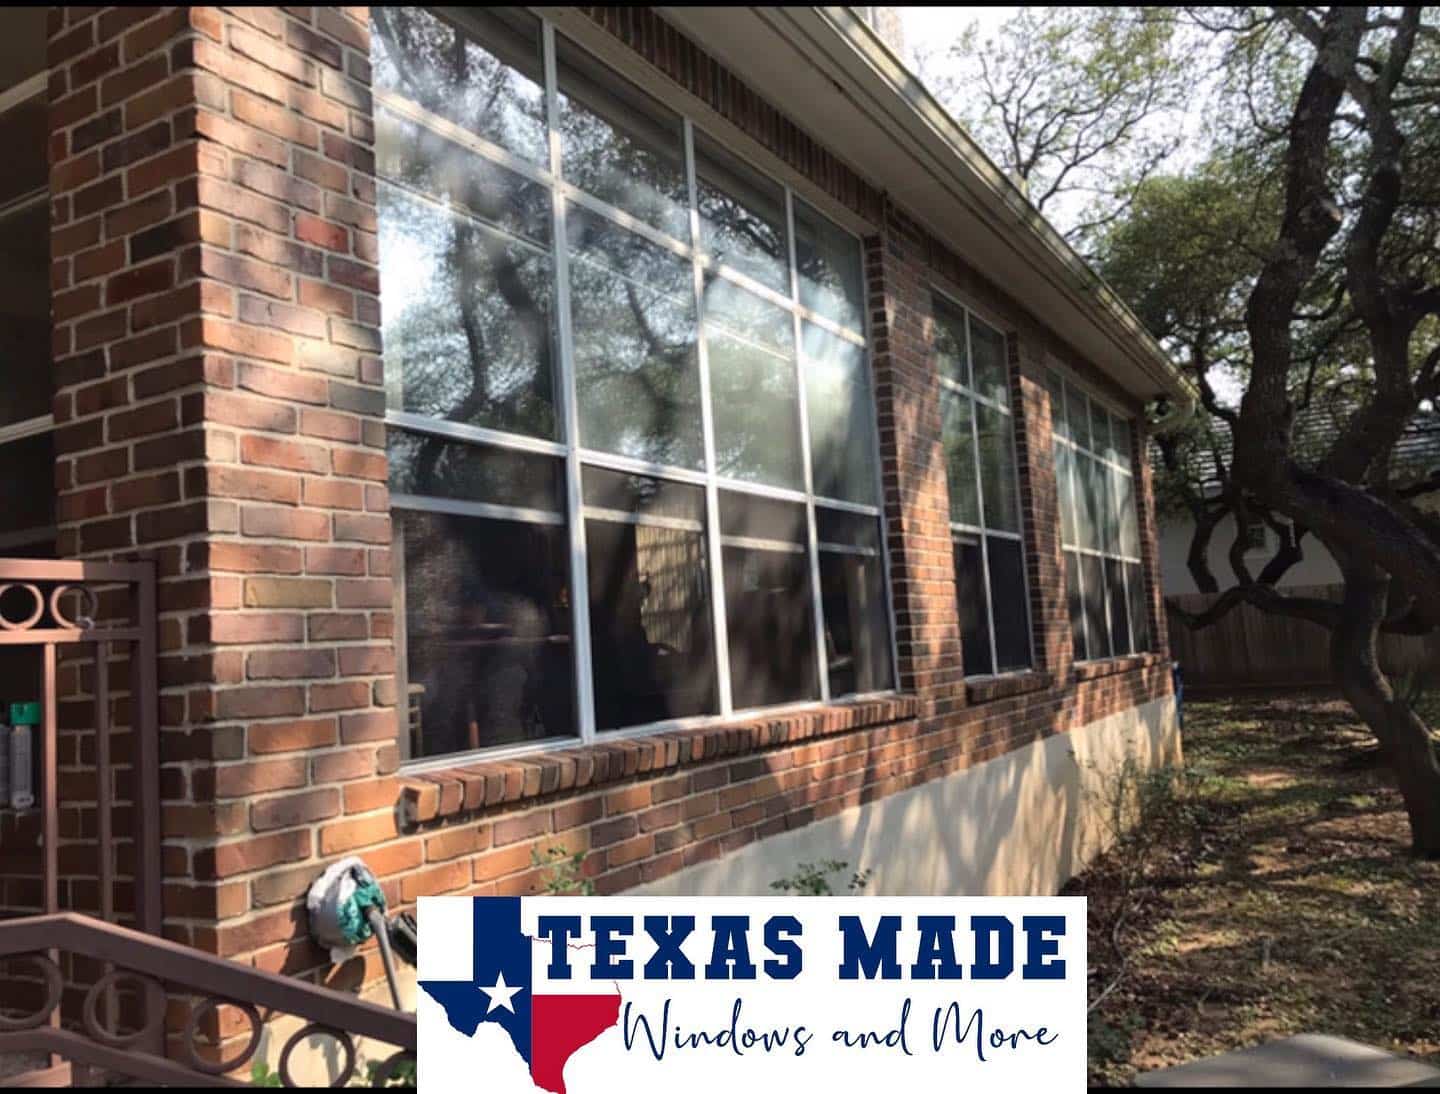 Large brick home with old, reflective windows before replacement in San Antonio.